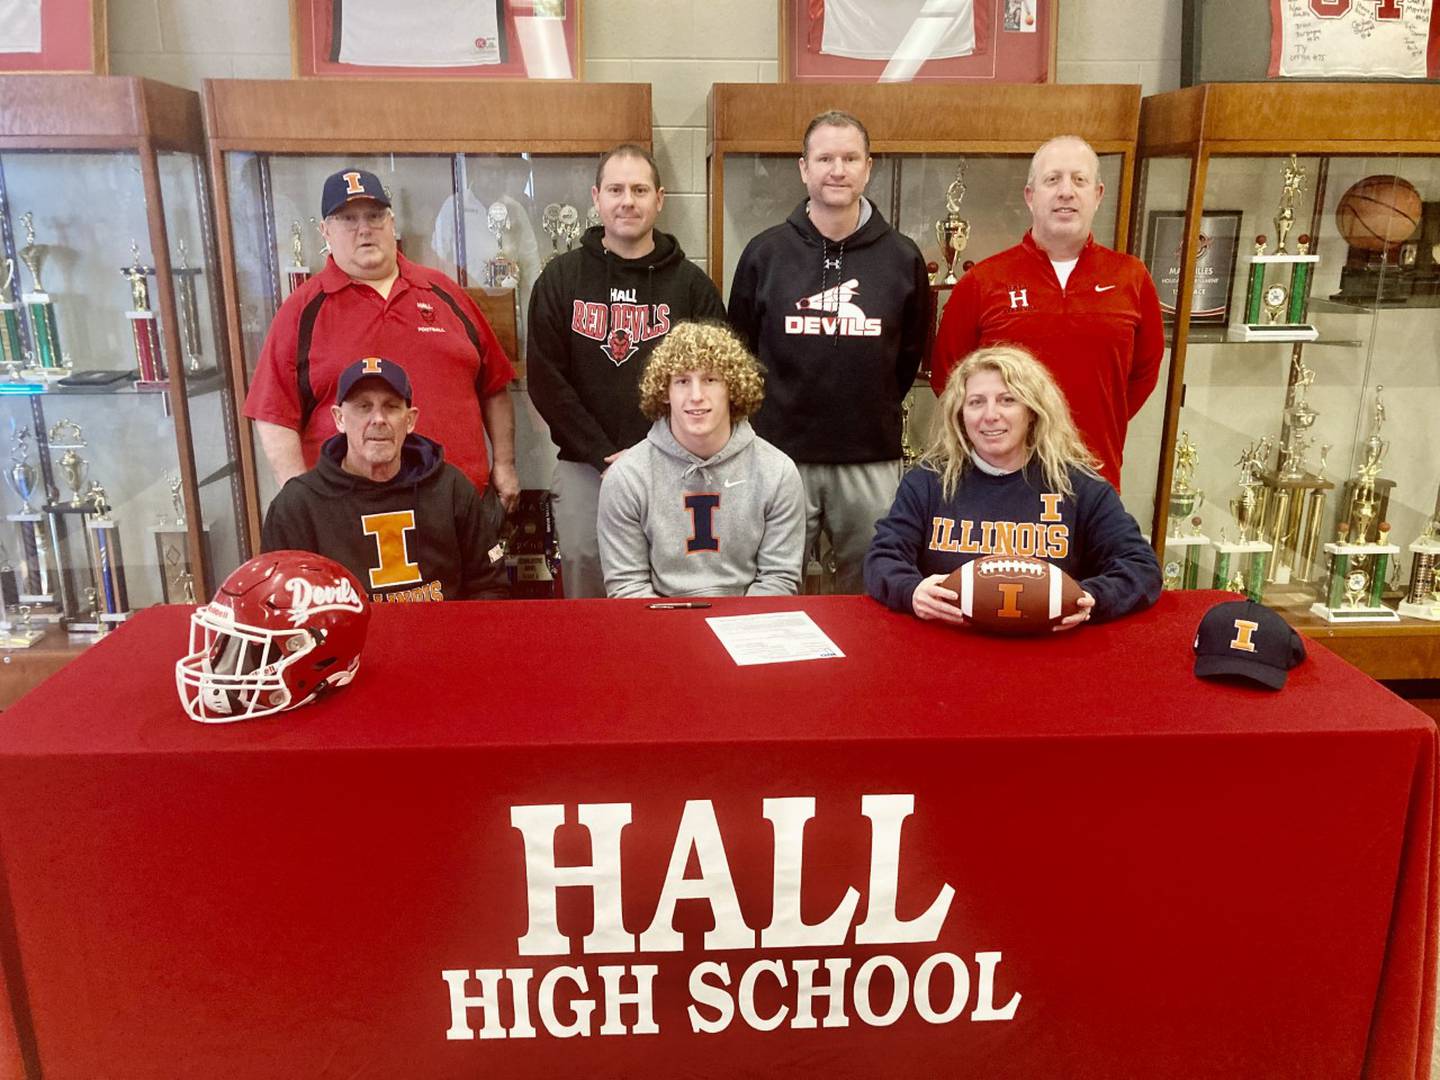 Hall senior Mac Resetich has received a full-ride scholarship offer to play football for the University of Illinois. He is one  of 23 players this year recruited by the Illini this year. He was joined at Wednesday's signing by his parents, Kim Resetich (front) and Betsy Sobin; and Hall coaches (back from left) Randy Tieman, Nick Hanck, Tom Keegan and Mike Filippini.